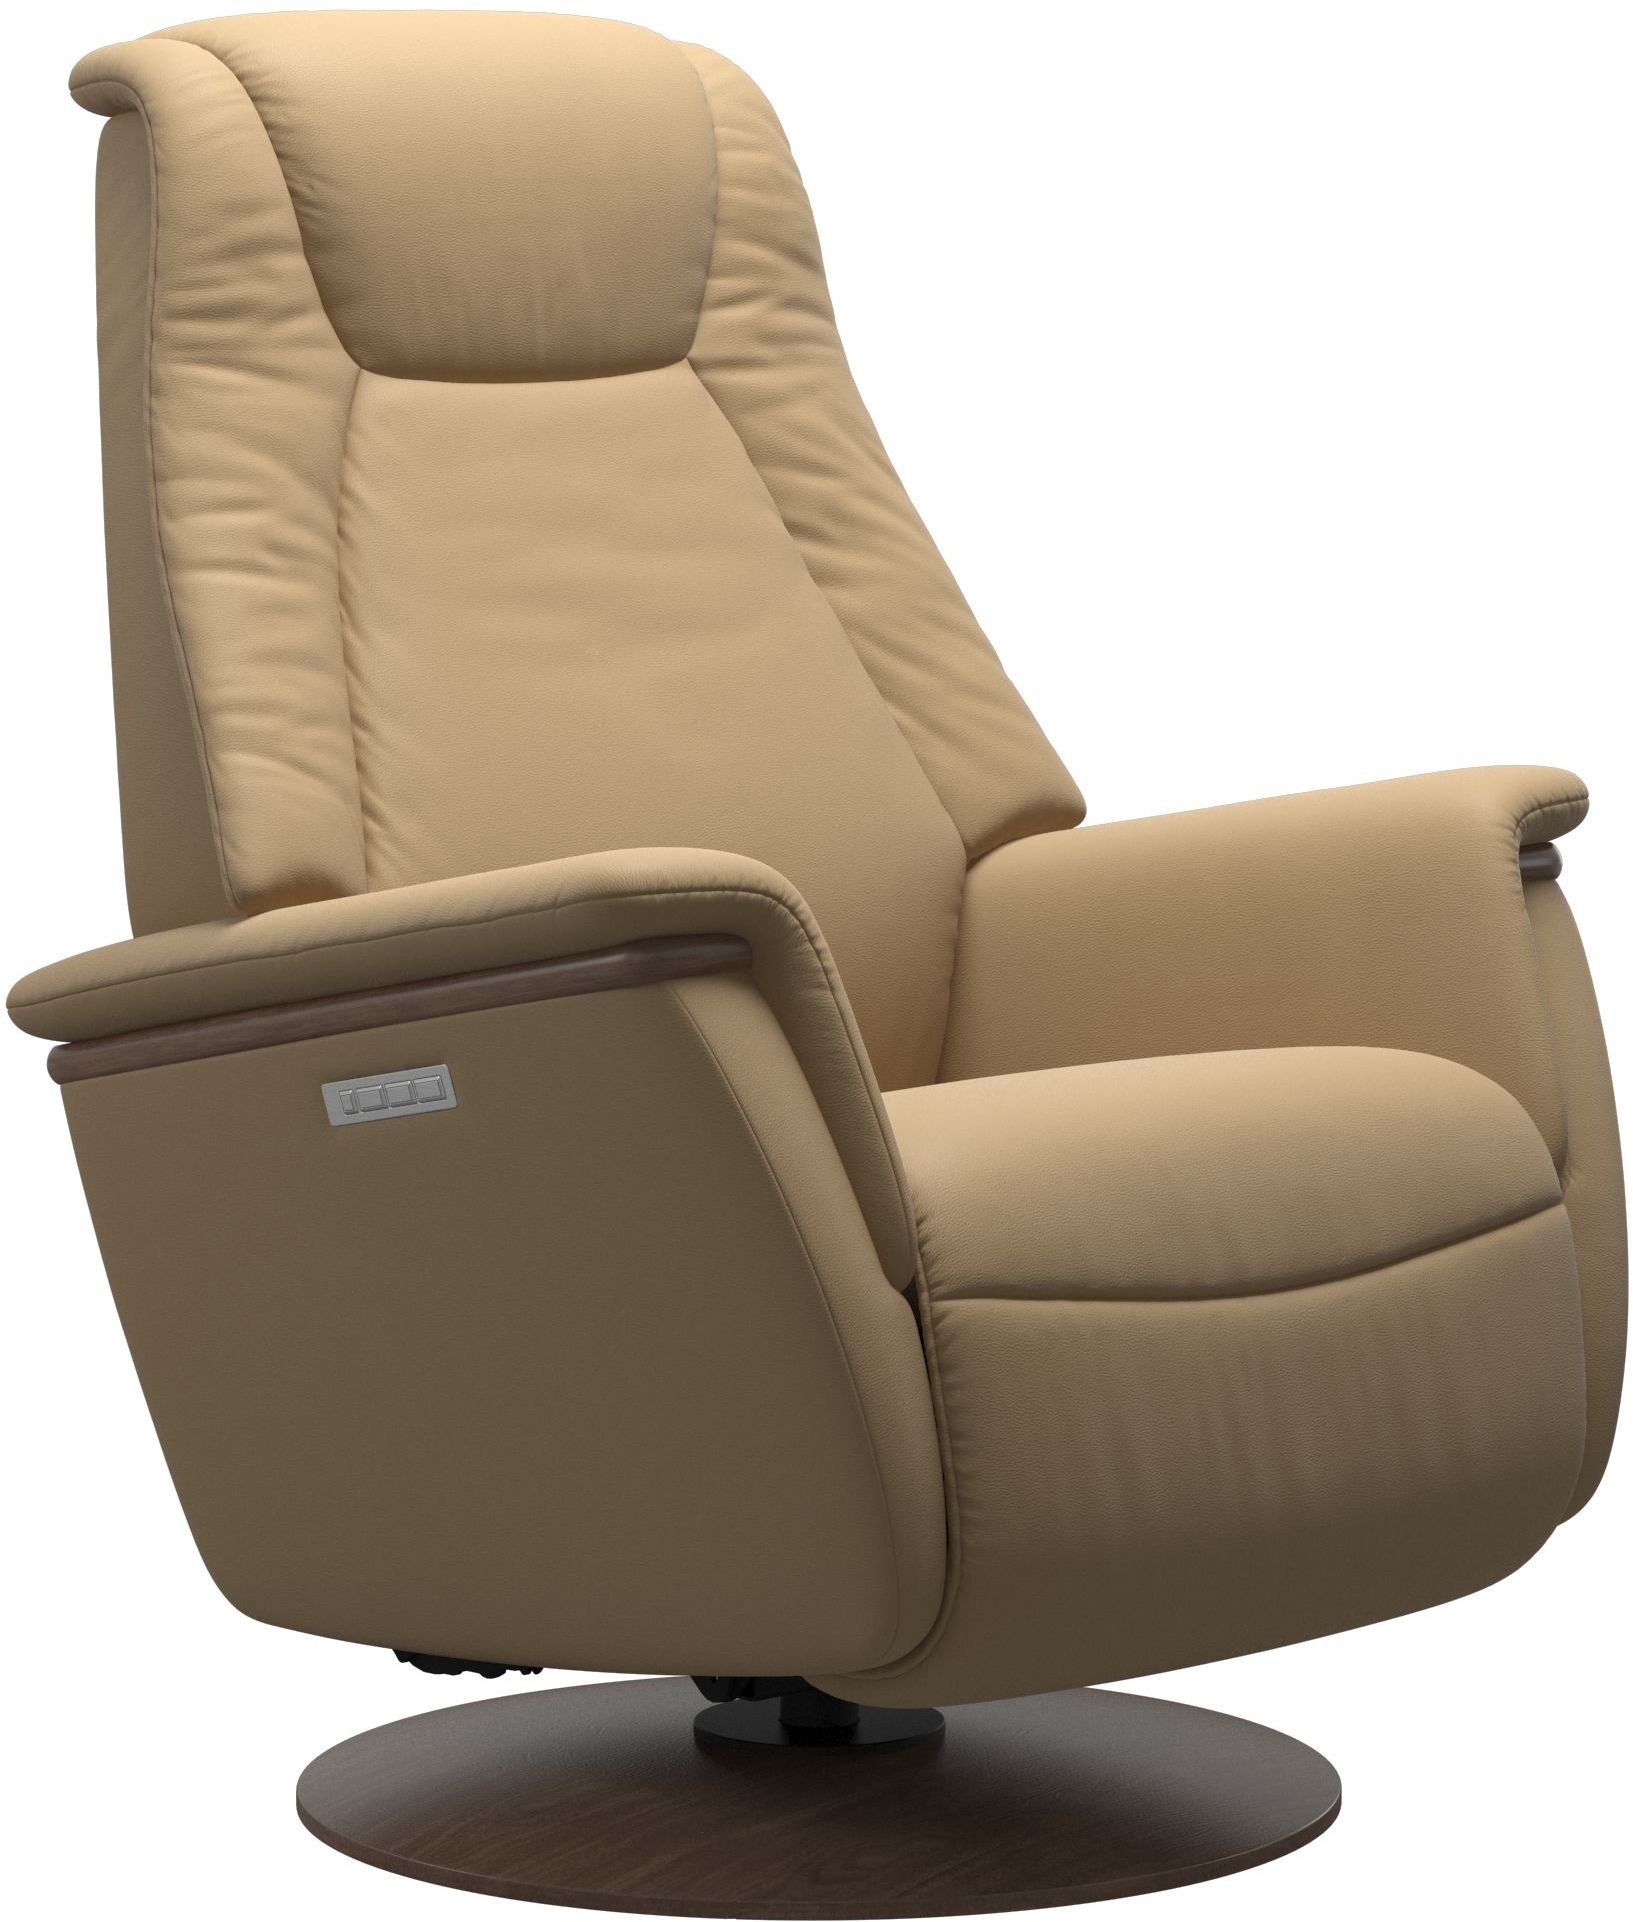 Stressless® by Ekornes® Max Medium All Leather Sand Power Swivel Recliner Chair